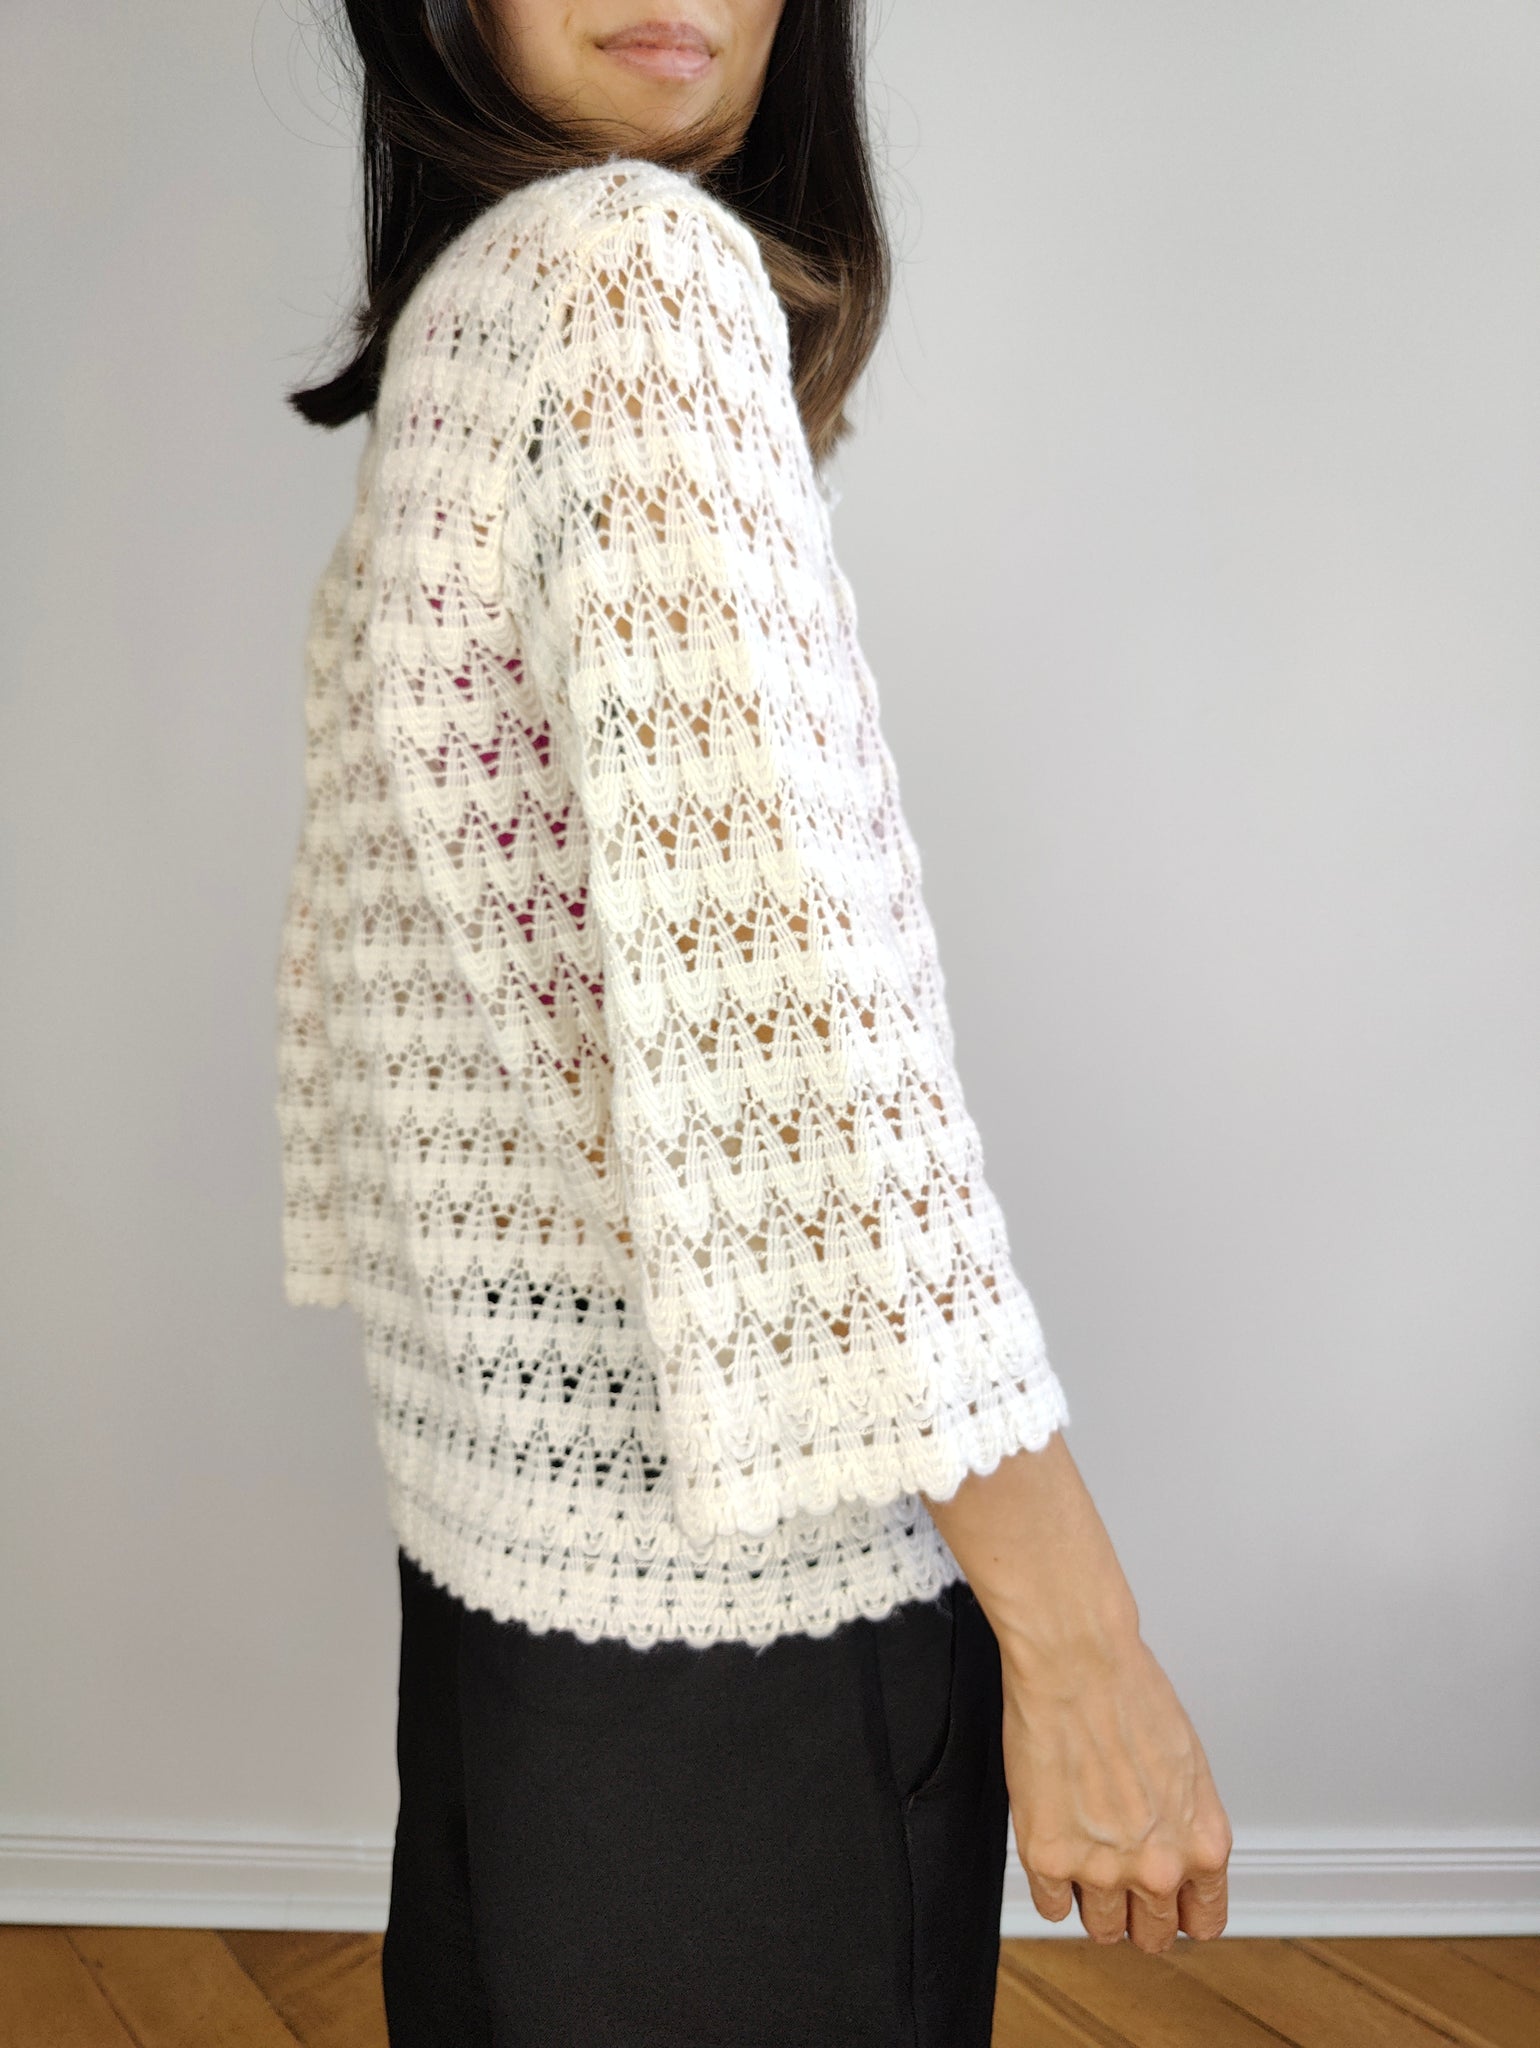 The Crochet Open Knit White Cardigan | Vintage 3/4 bell sleeve bow